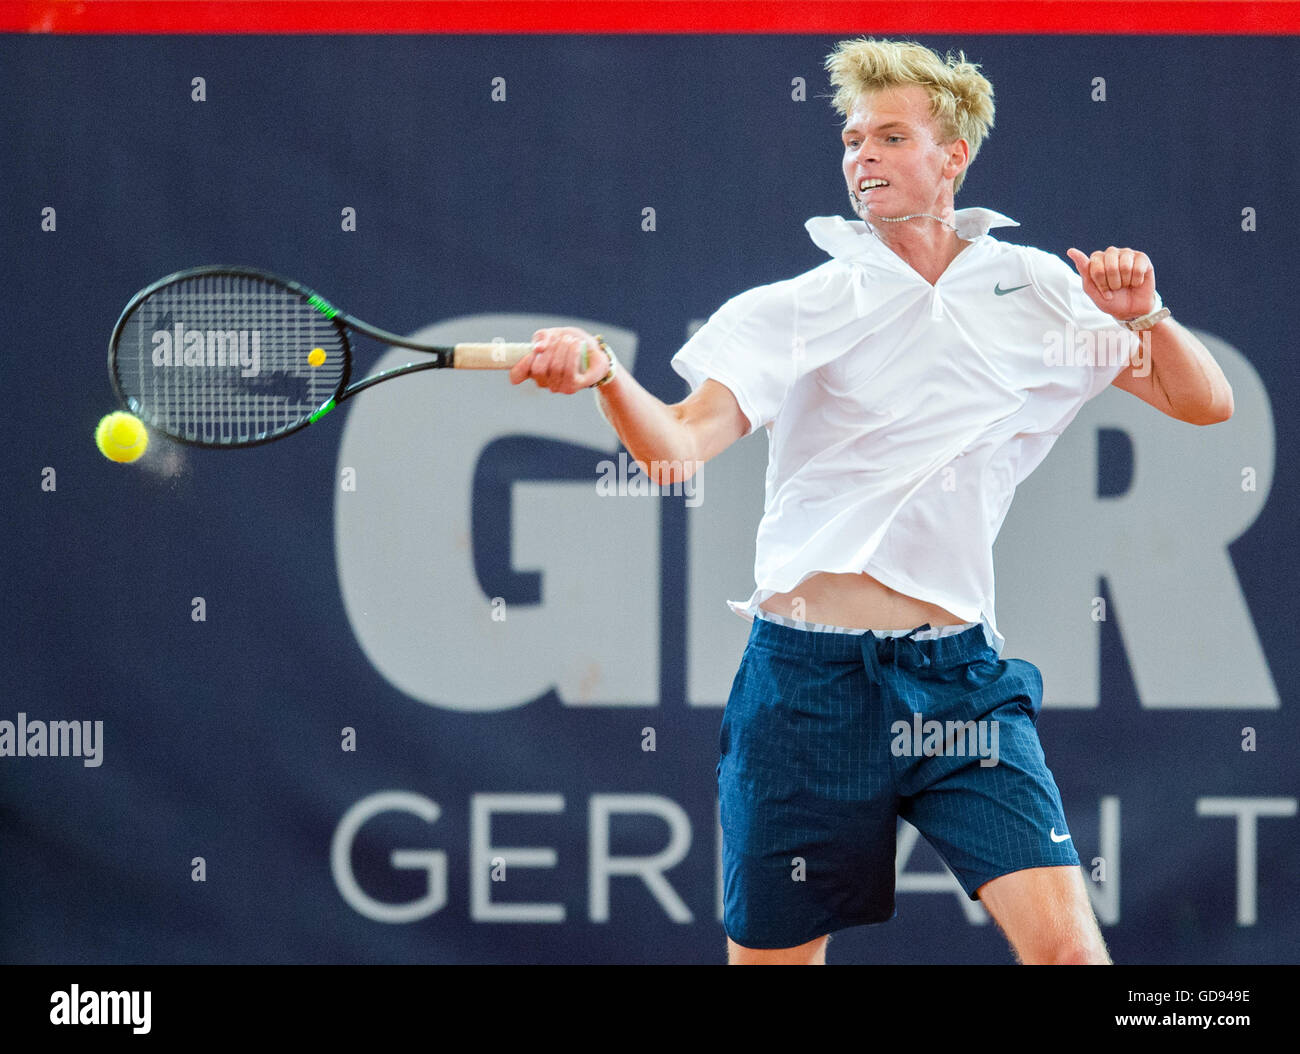 Hamburg, Germany. 14th July, 2016. Louis Wessels of Germany plays against  Klizan of Slovakia during a round of 16 match at the ATP Tour - German  Tennis Championships at the Am Rothenbaum